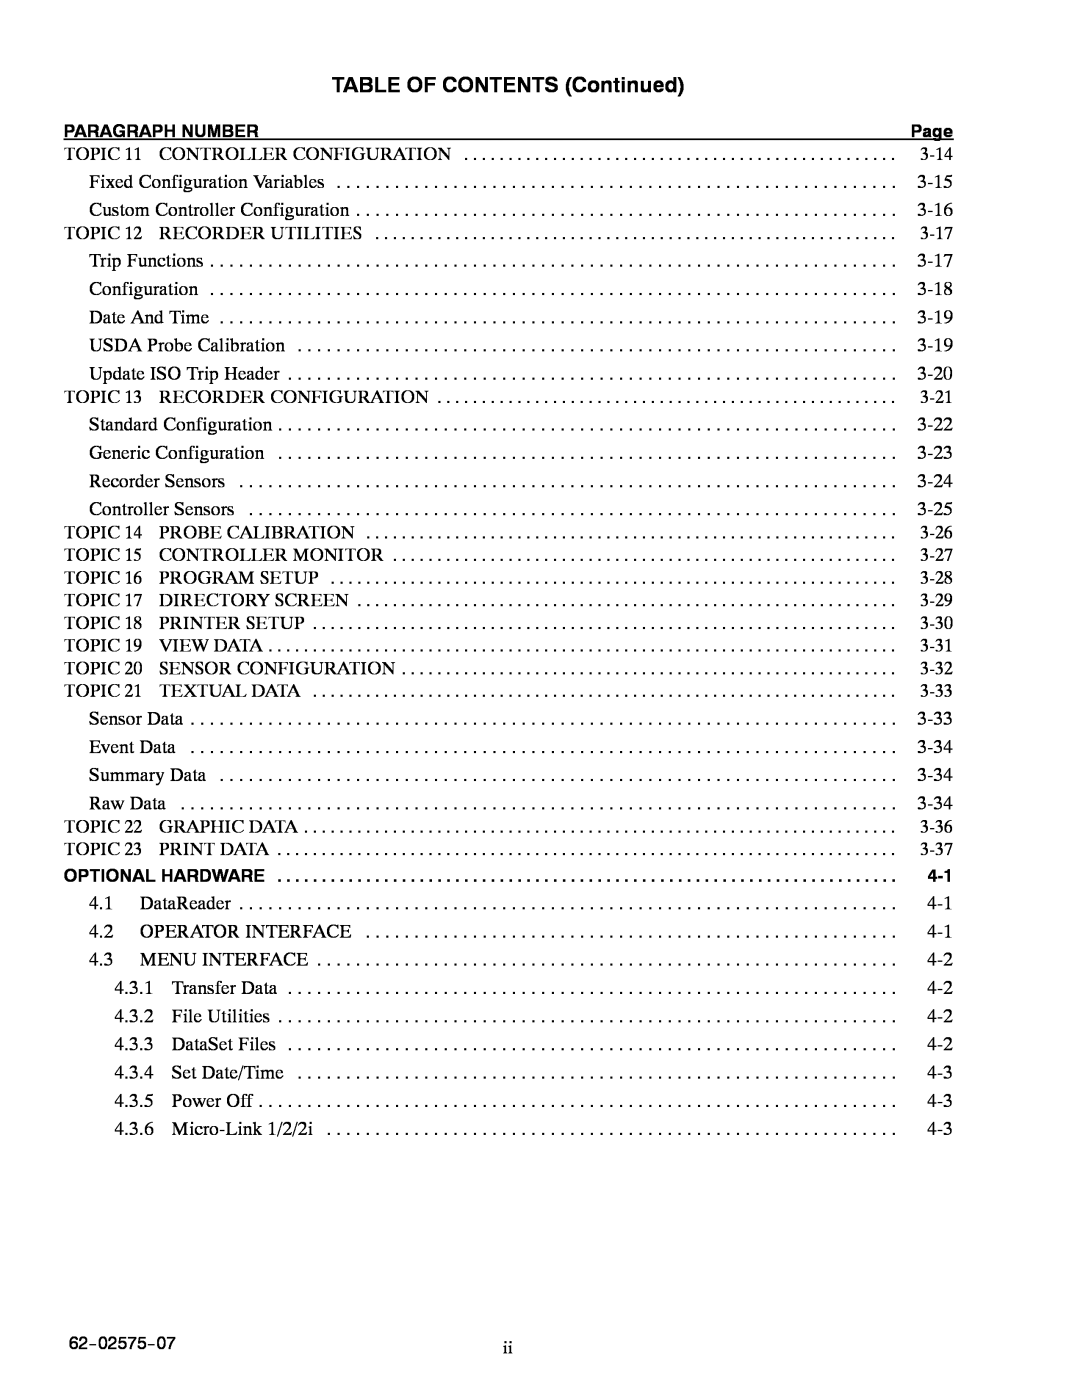 Carrier Container Refrigeration Unit manual TABLE OF CONTENTS Continued, Operator Interface 